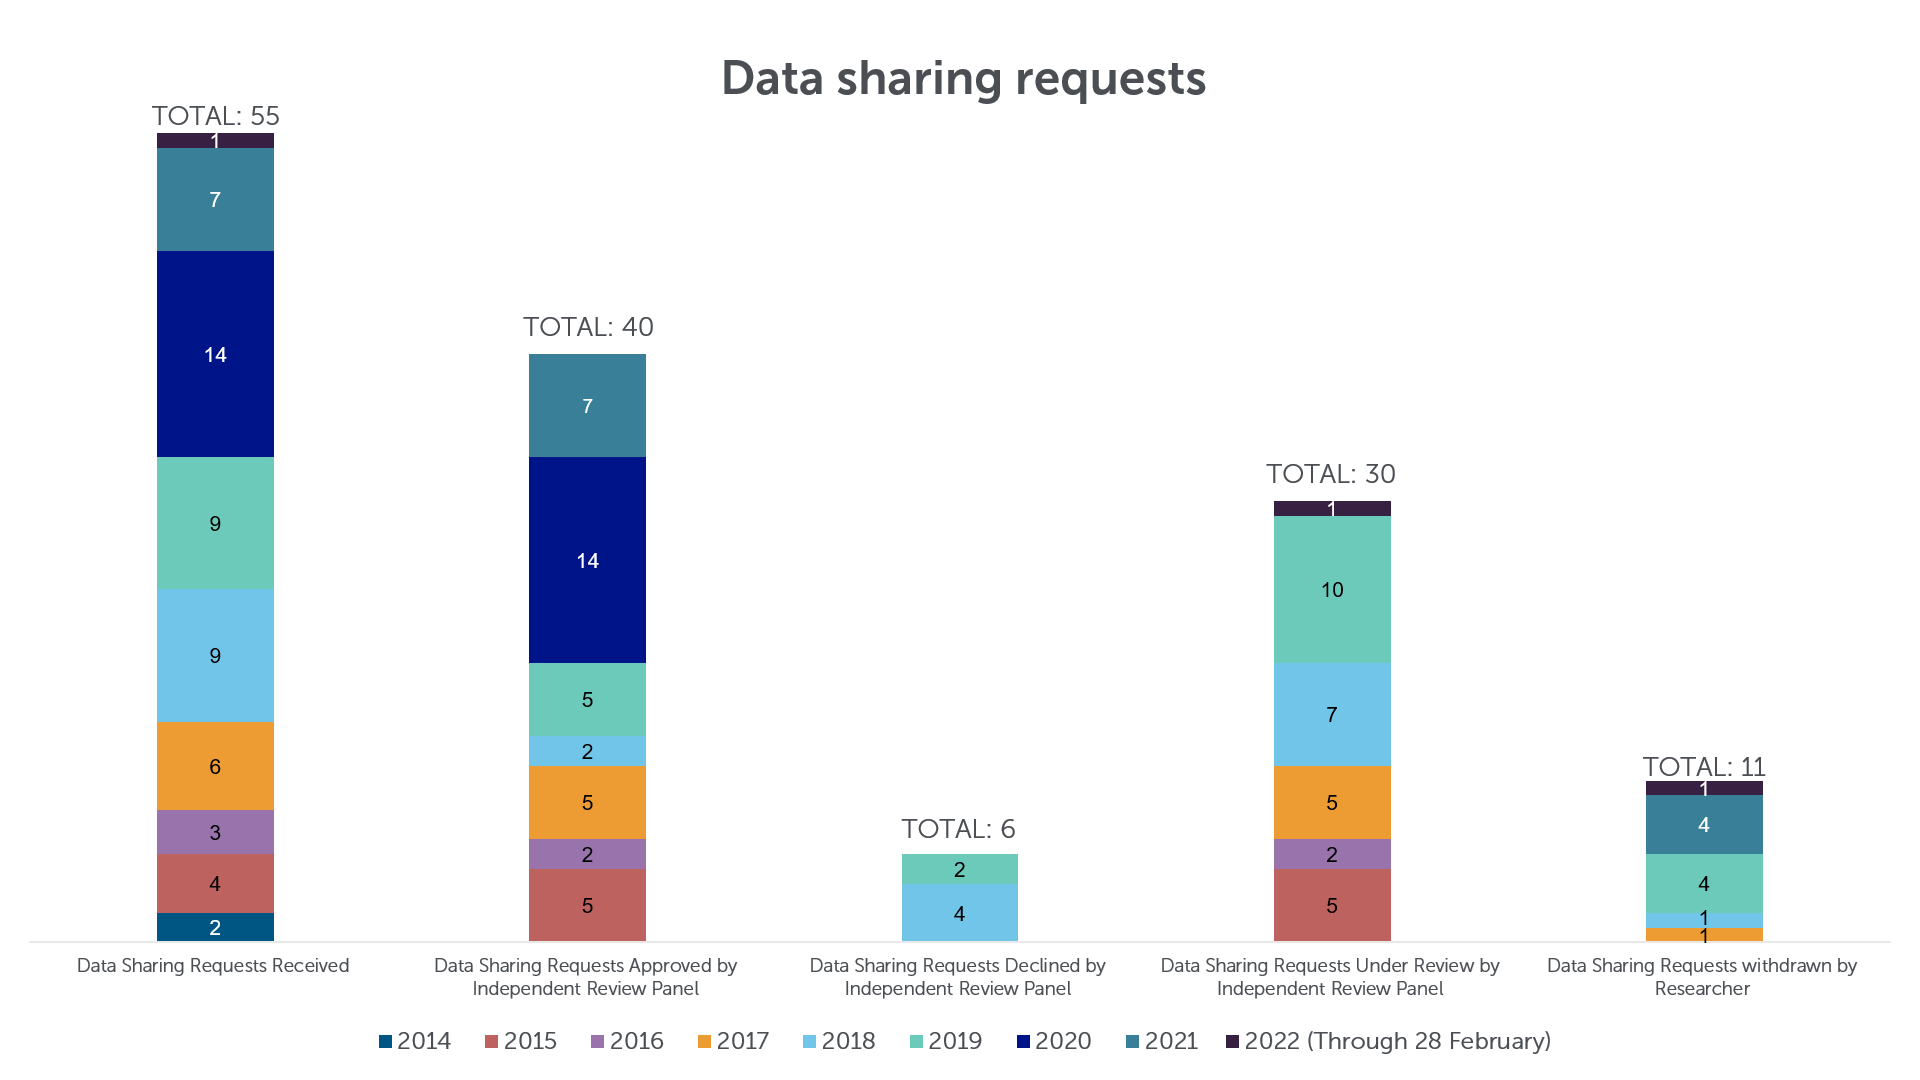 Data sharing requests 2014 to 2022 Q1